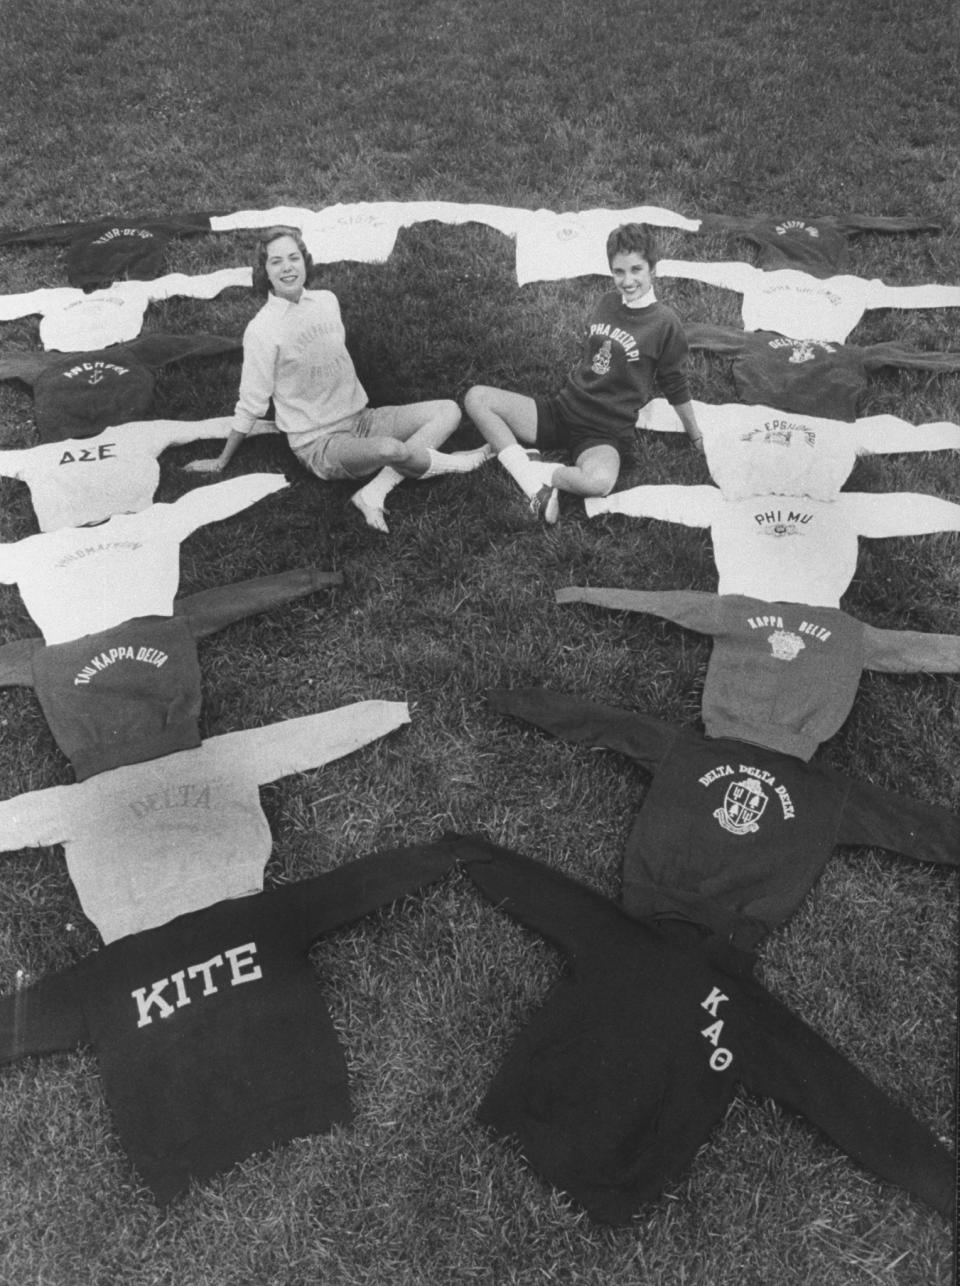 Vintage photo of young women posing with different sorority sweatshirts